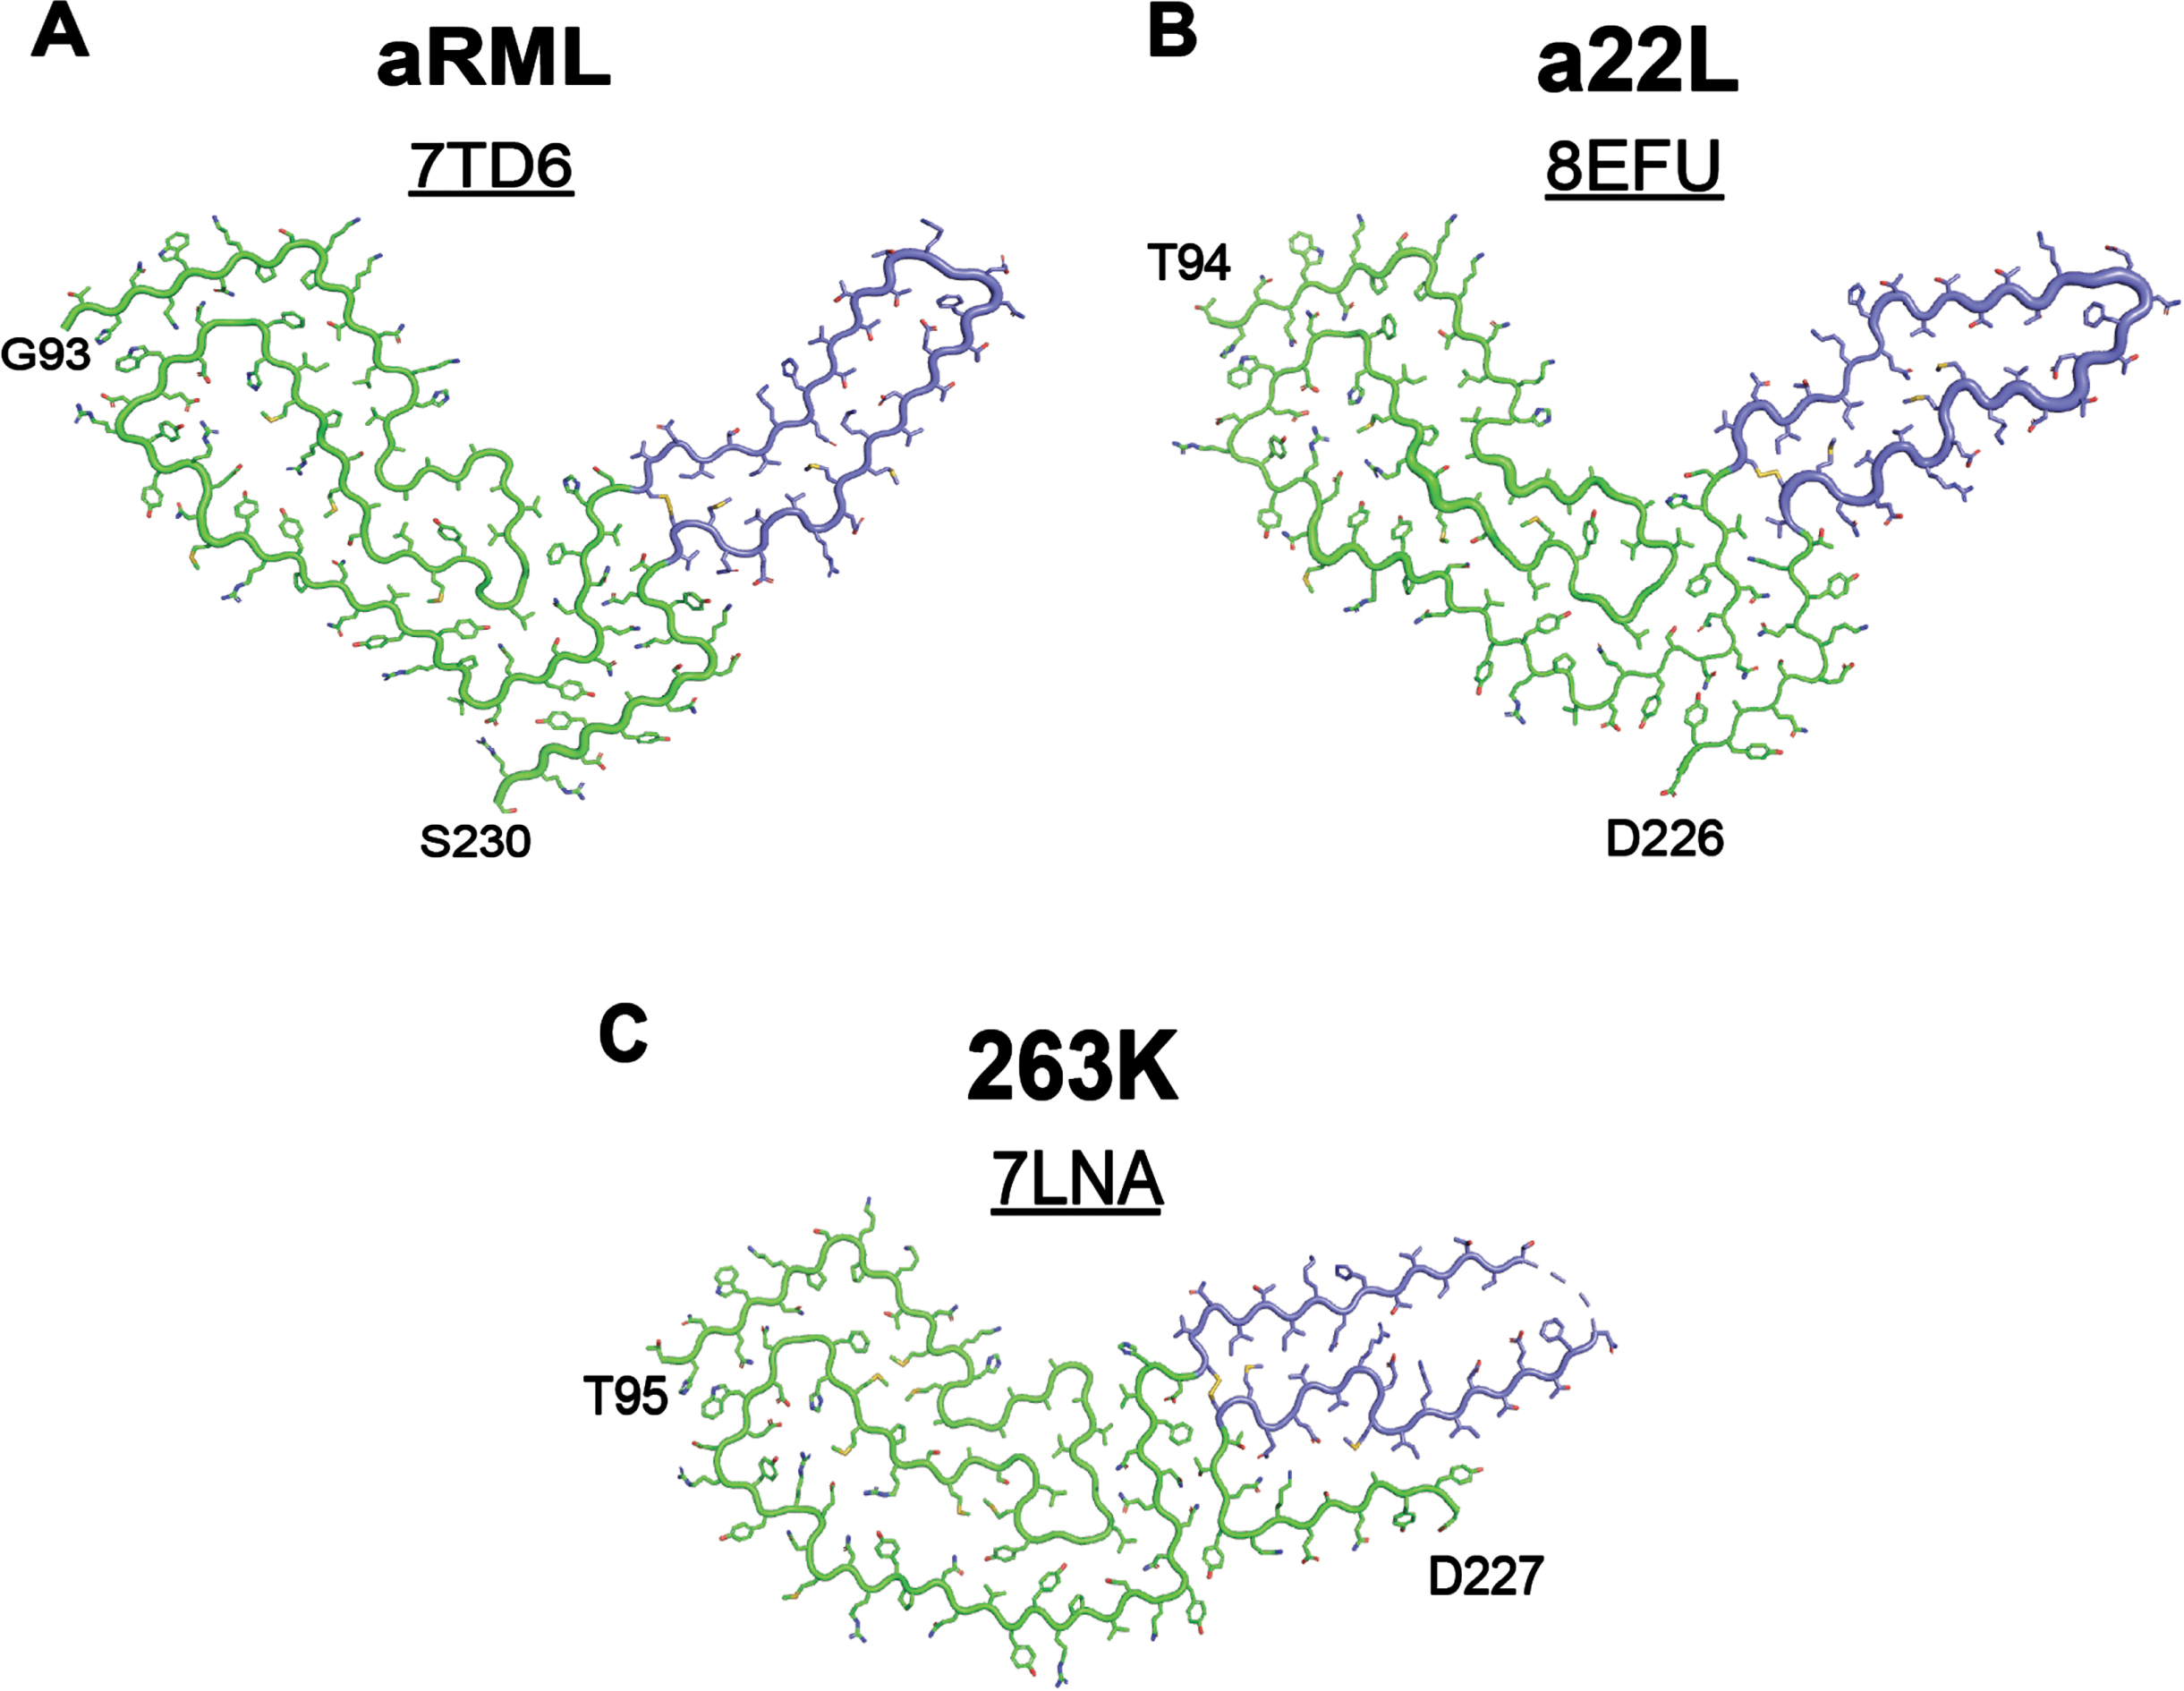 
Small changes in protein structure underly distinct strain properties. Cryo-EM structures of rodent-adapted and lab cloned scrapie strains show a conserved N-terminal sequence in (A) aRML (PDB ID: 7TD6), (B) a22L (PDB ID: 8EFU), and (C) 263K (PDB ID: 7LNA) prion strains. Variation is largely restricted to the C-terminal disulfide arches, highlighted in periwinkle. aRML and a22L were isolated from mouse brain homogenates3, 4 and 263K was isolated from hamster brain homogenates.5
